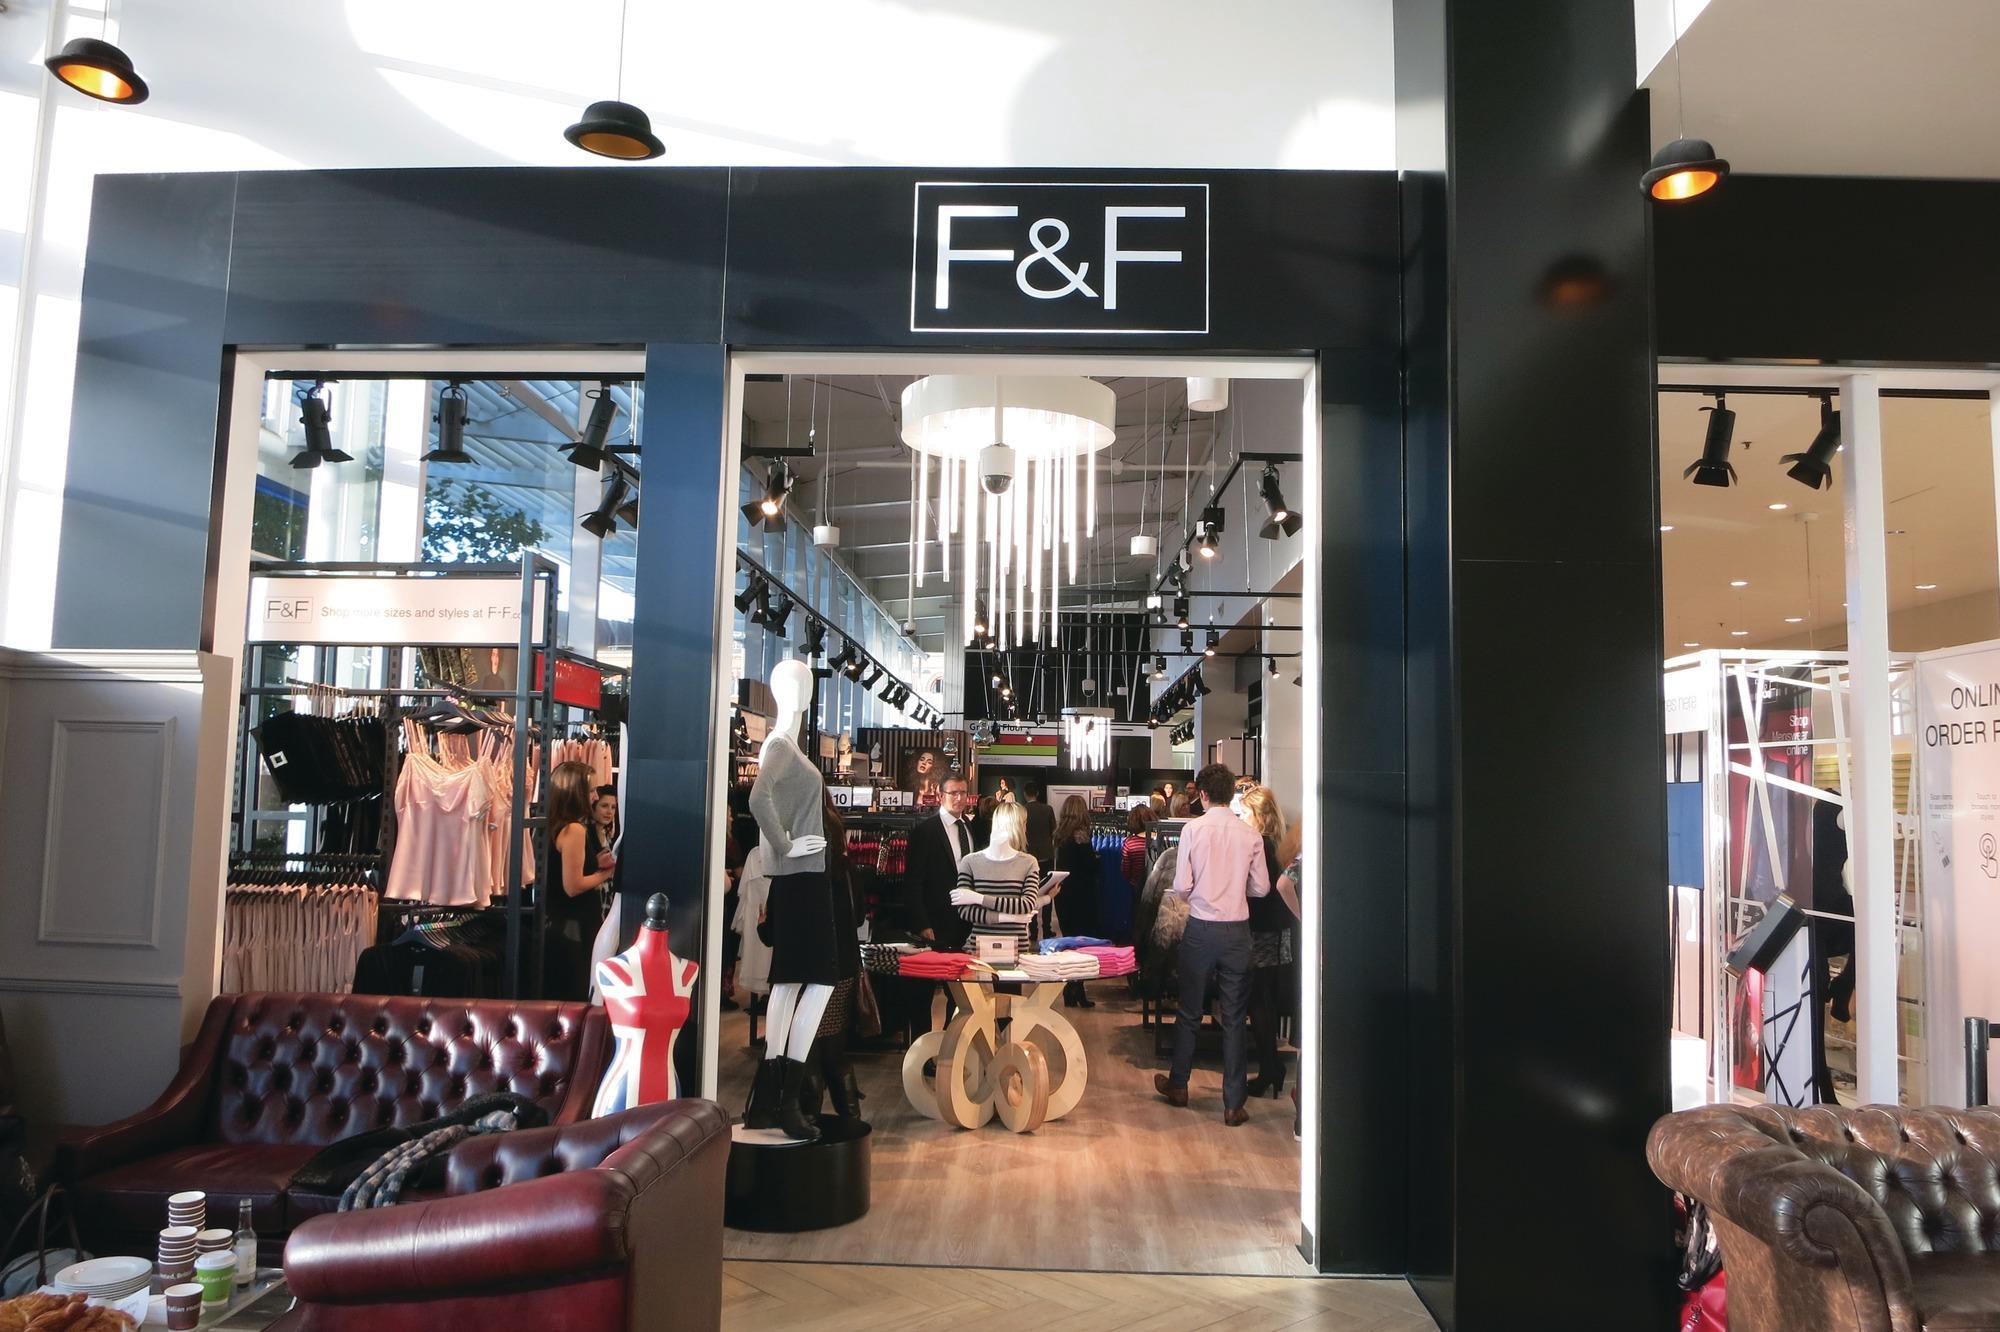 Tesco F&F global brand and marketing director to depart